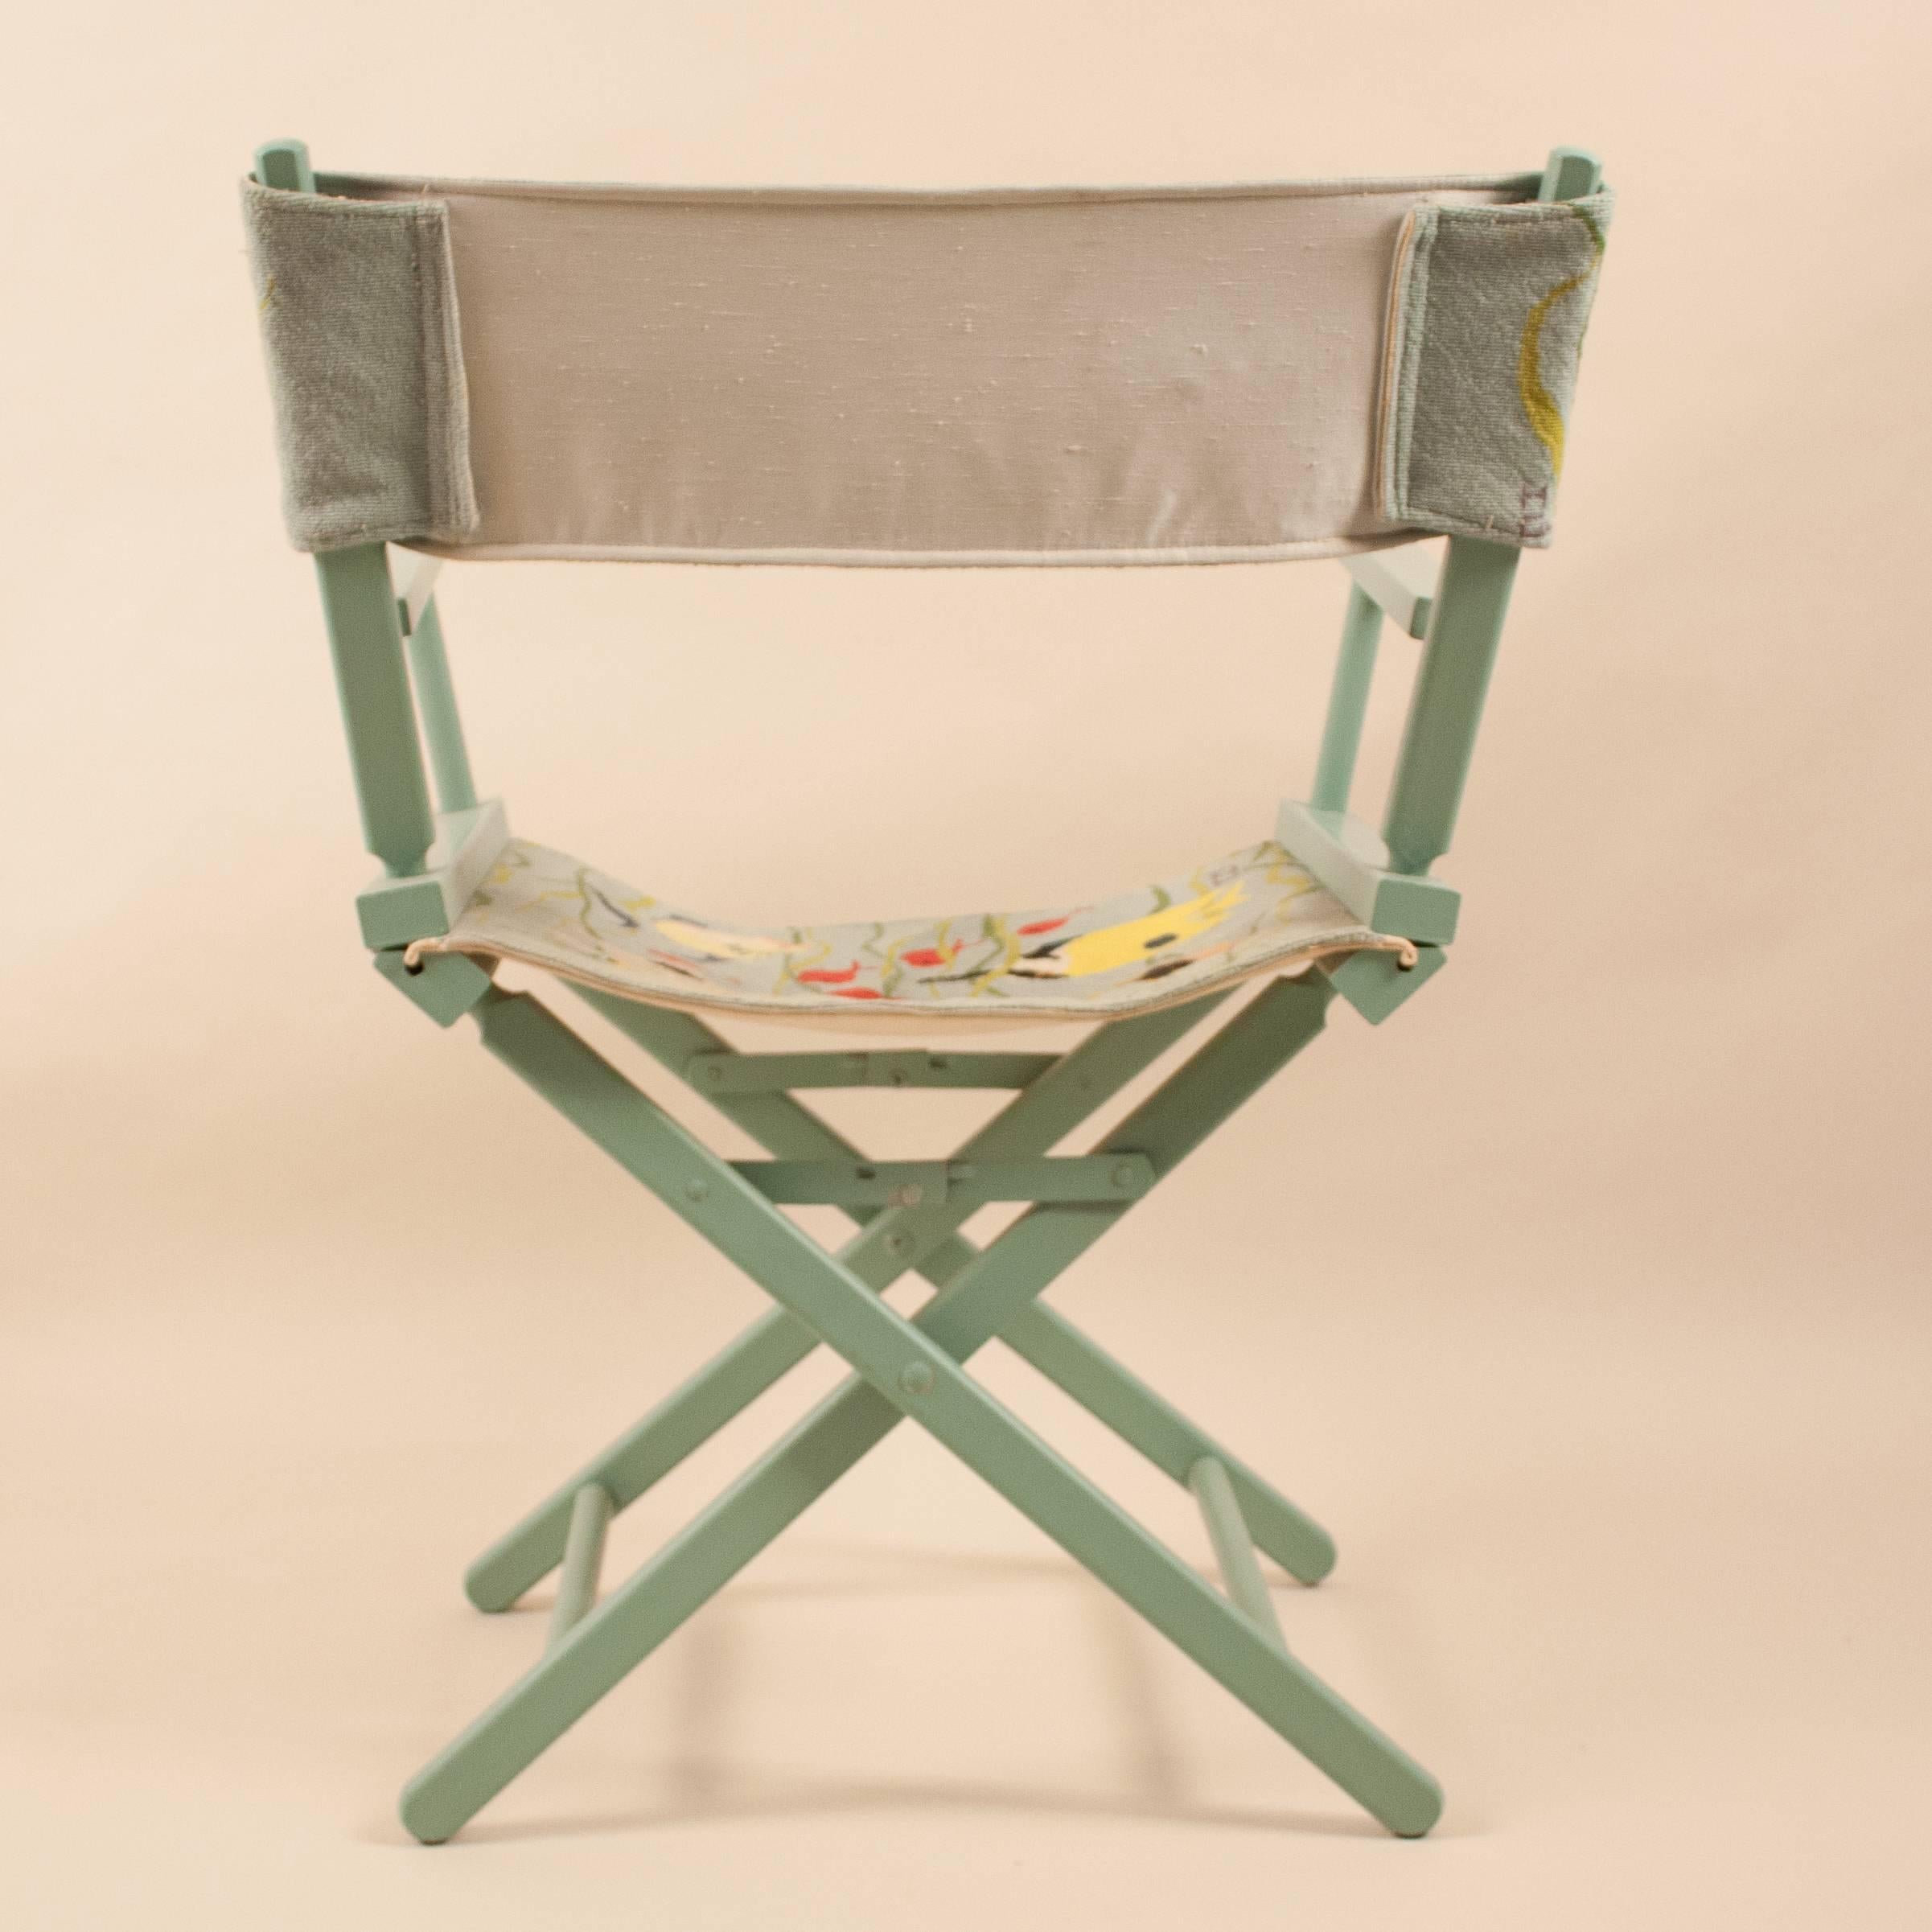 Canvas Director's Chair with Needlepoint Tropical Fish Fabric